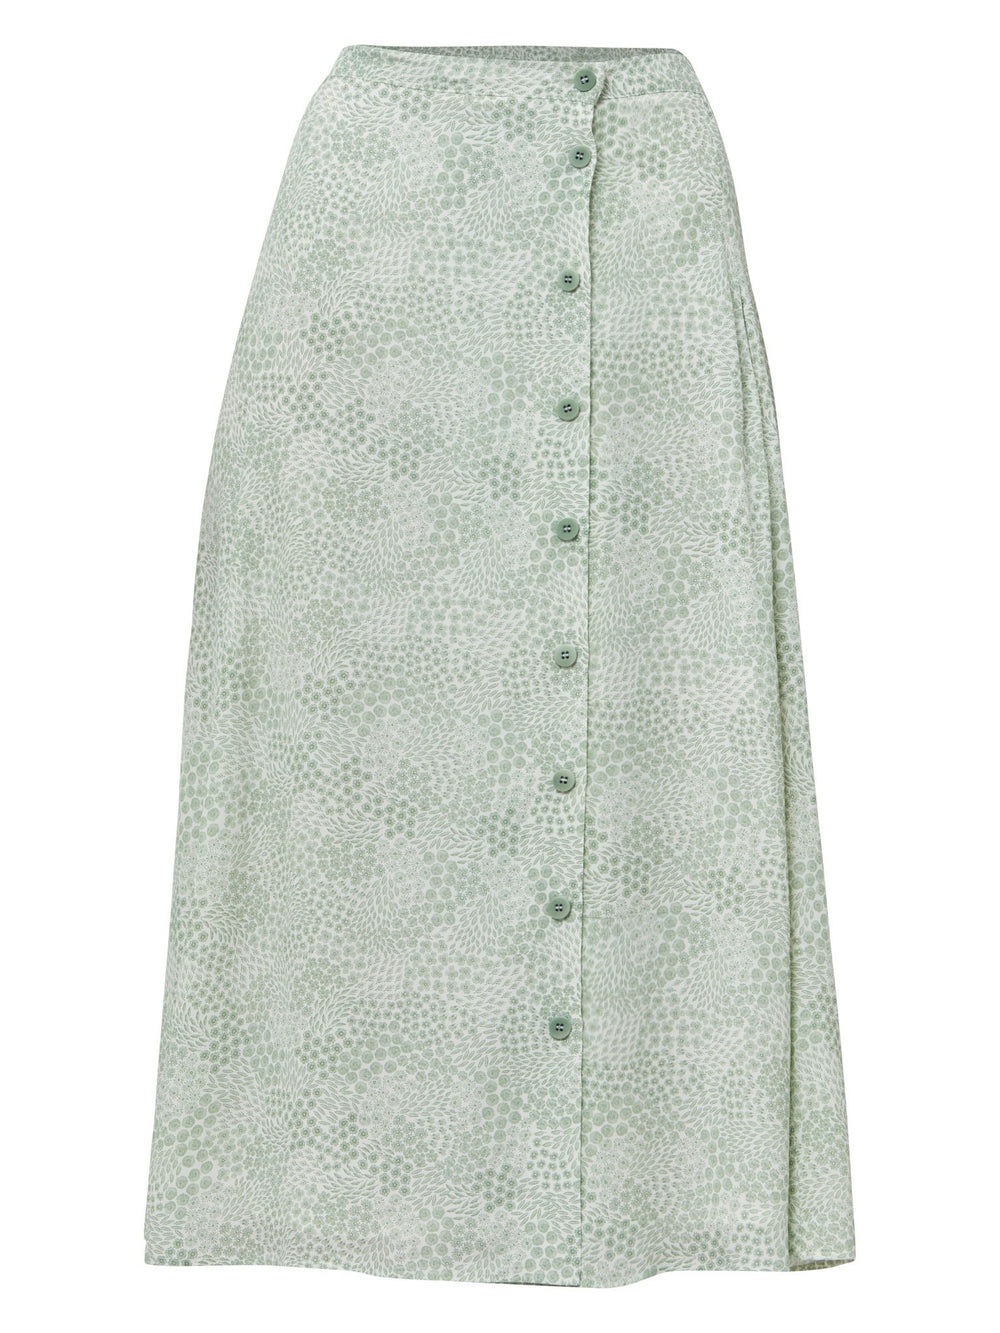 The essential summer skirt. Meet Sadie, a vintage bi-color mini floral in viscose crepe. Off-centered button through A-line silhouette with an elasticated back waistband. Relaxed elegance for everyday life. Style with our white timeless tops or dress it down with the Khloe tea-green sweatshirt.